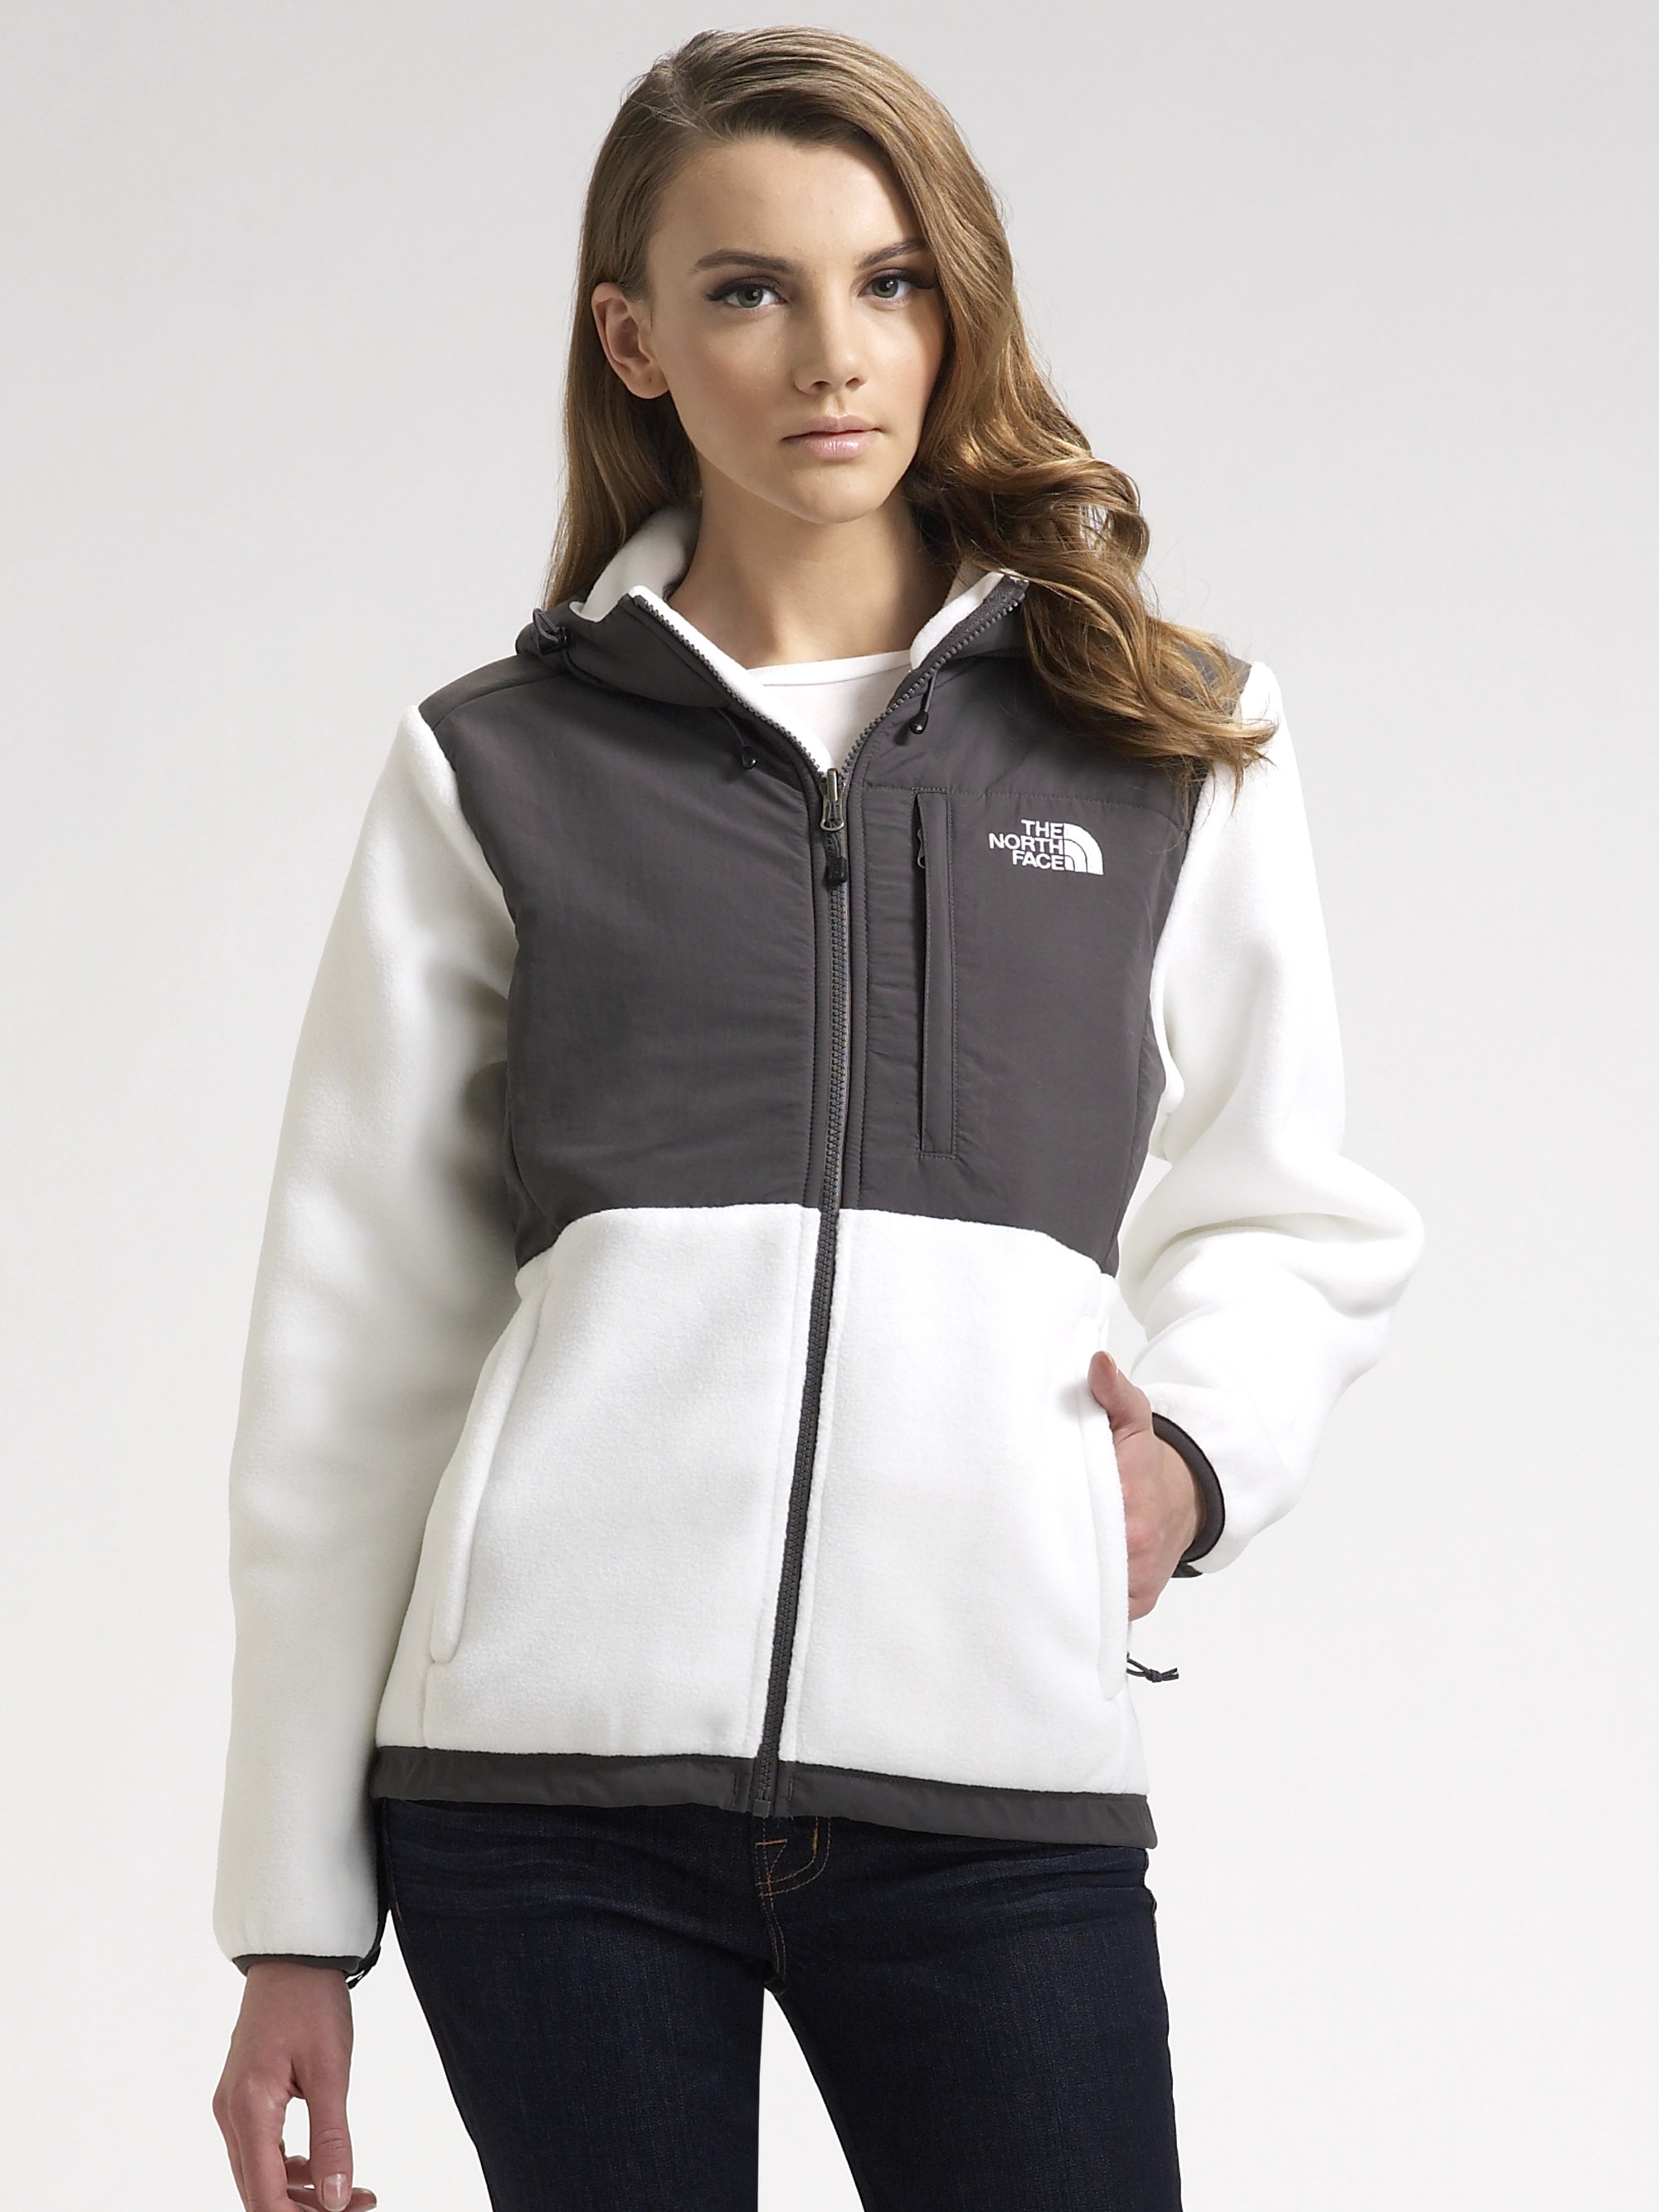 white and gray north face